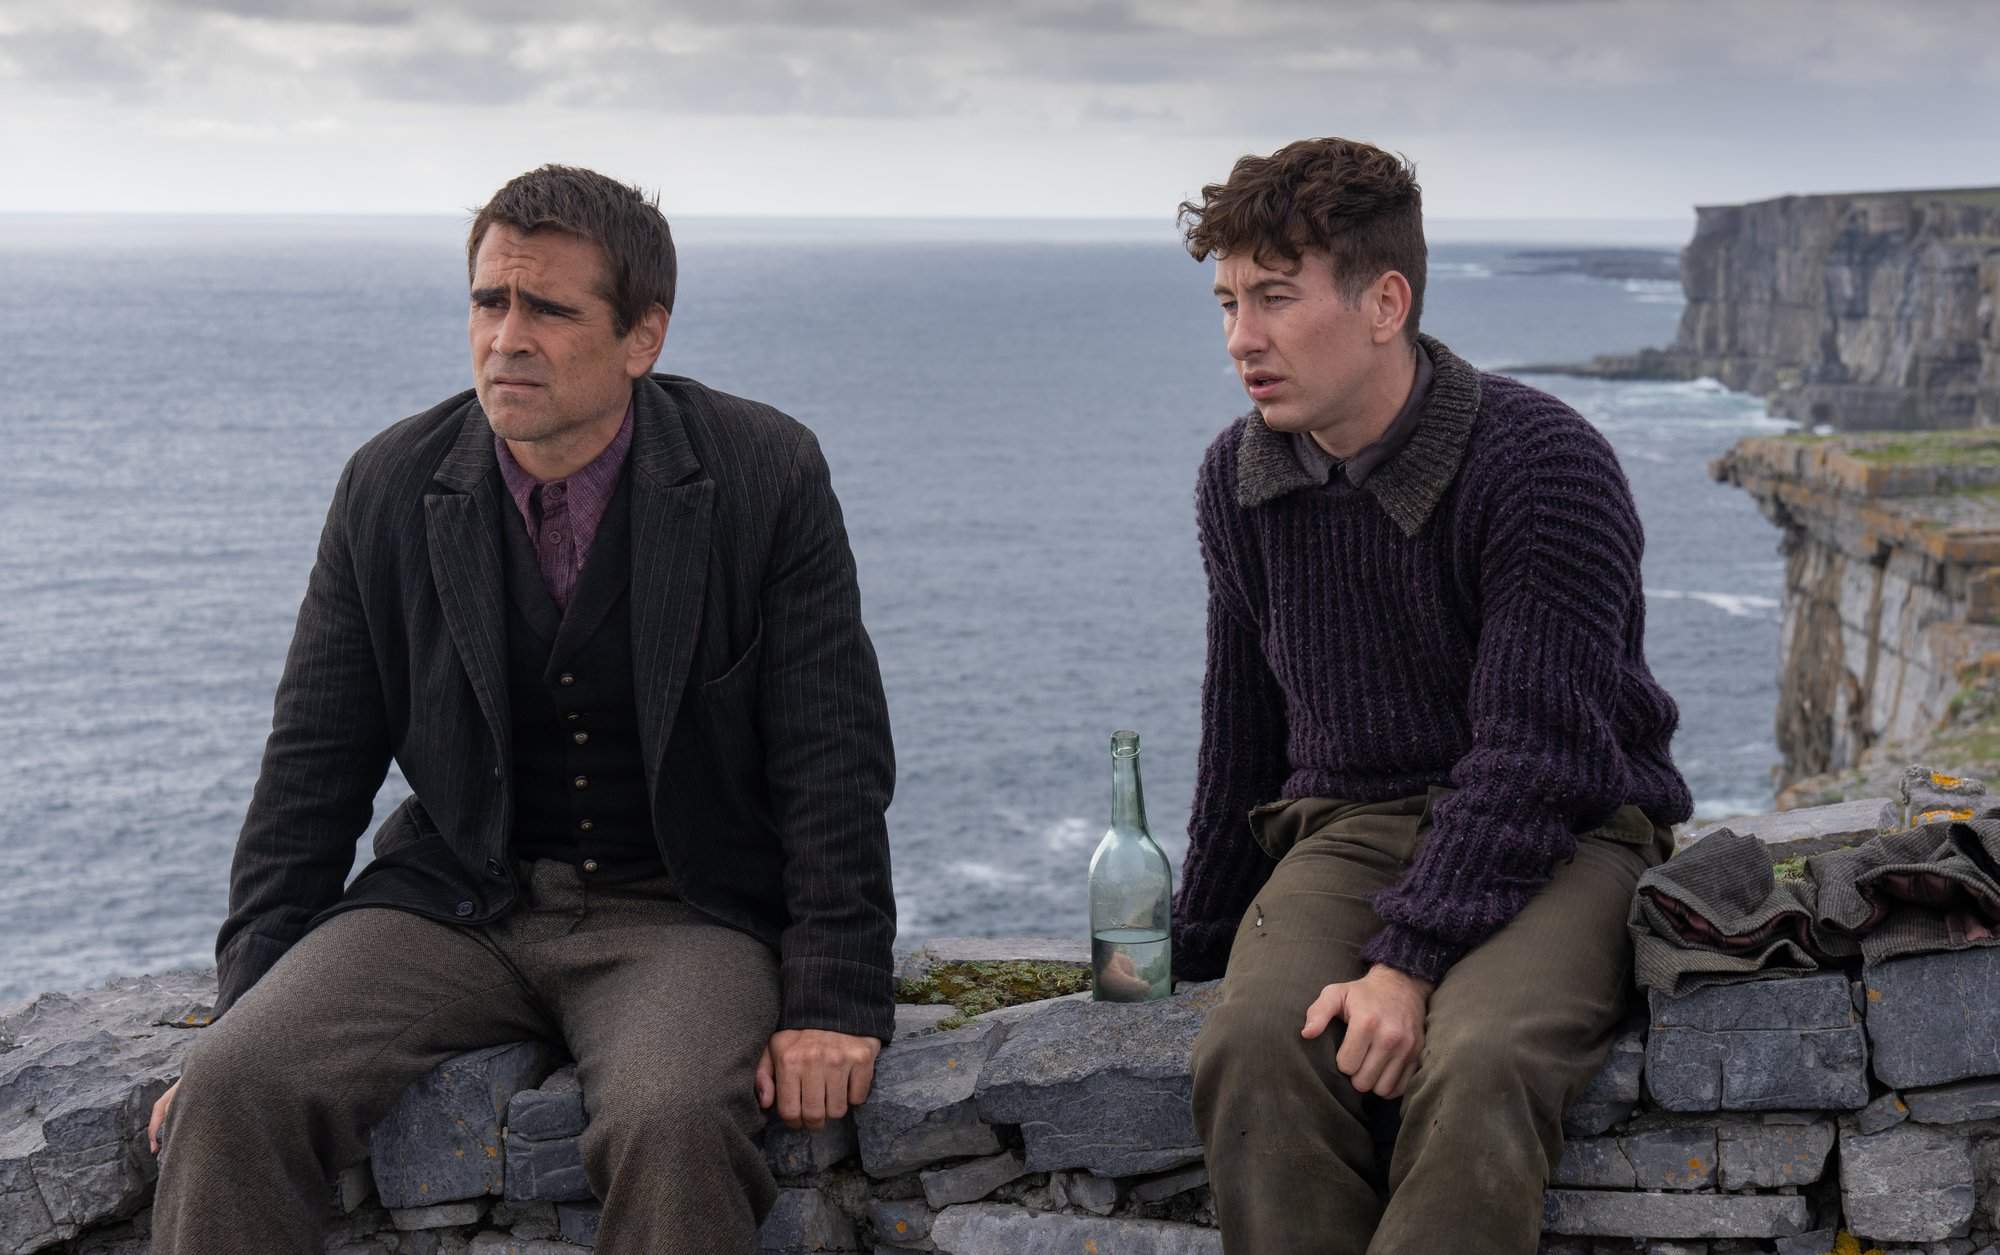 Oscars 2023 Best Picture nominee 'The Banshees of Inisherin' Colin Farrell as Pádraic Súilleabháin and Brendan Gleeson as Colm Doherty sitting on a stone wall with the ocean behind them.